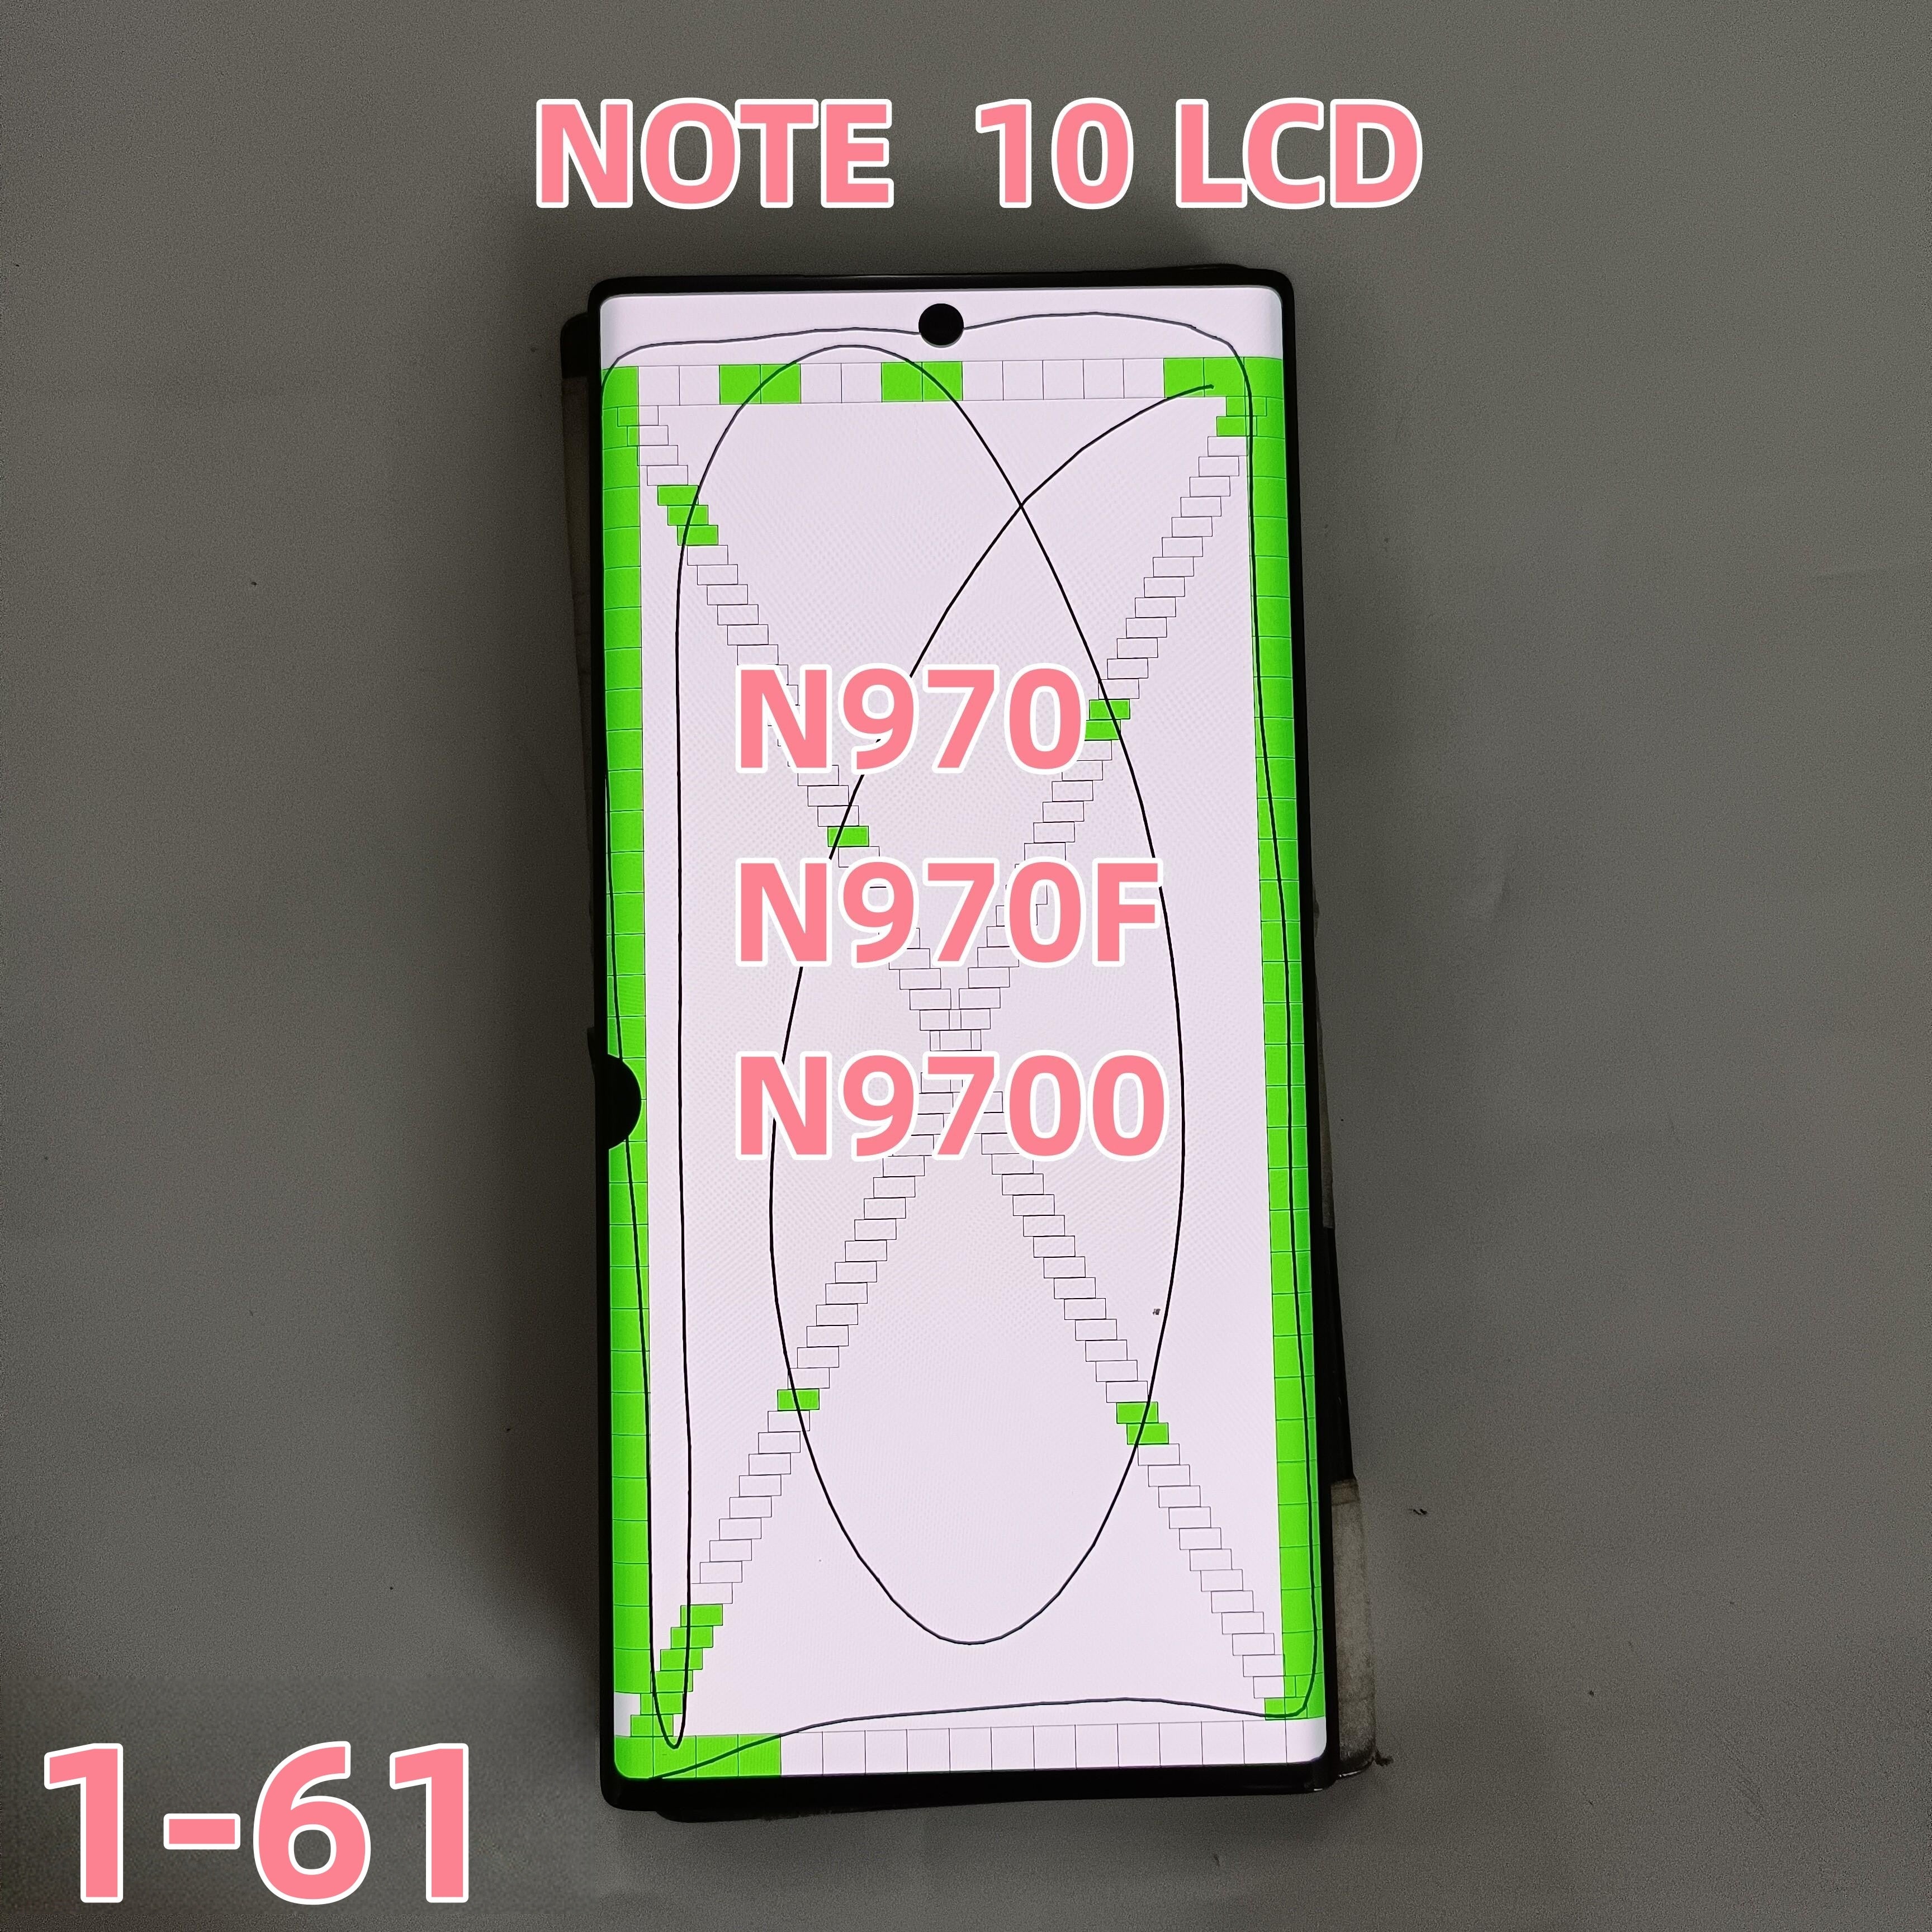 Original Lcd For Samsung Galaxy Note 10 Lcd N970 N970F N9700 Display Touch Screen Digitizer Assembly With Defects